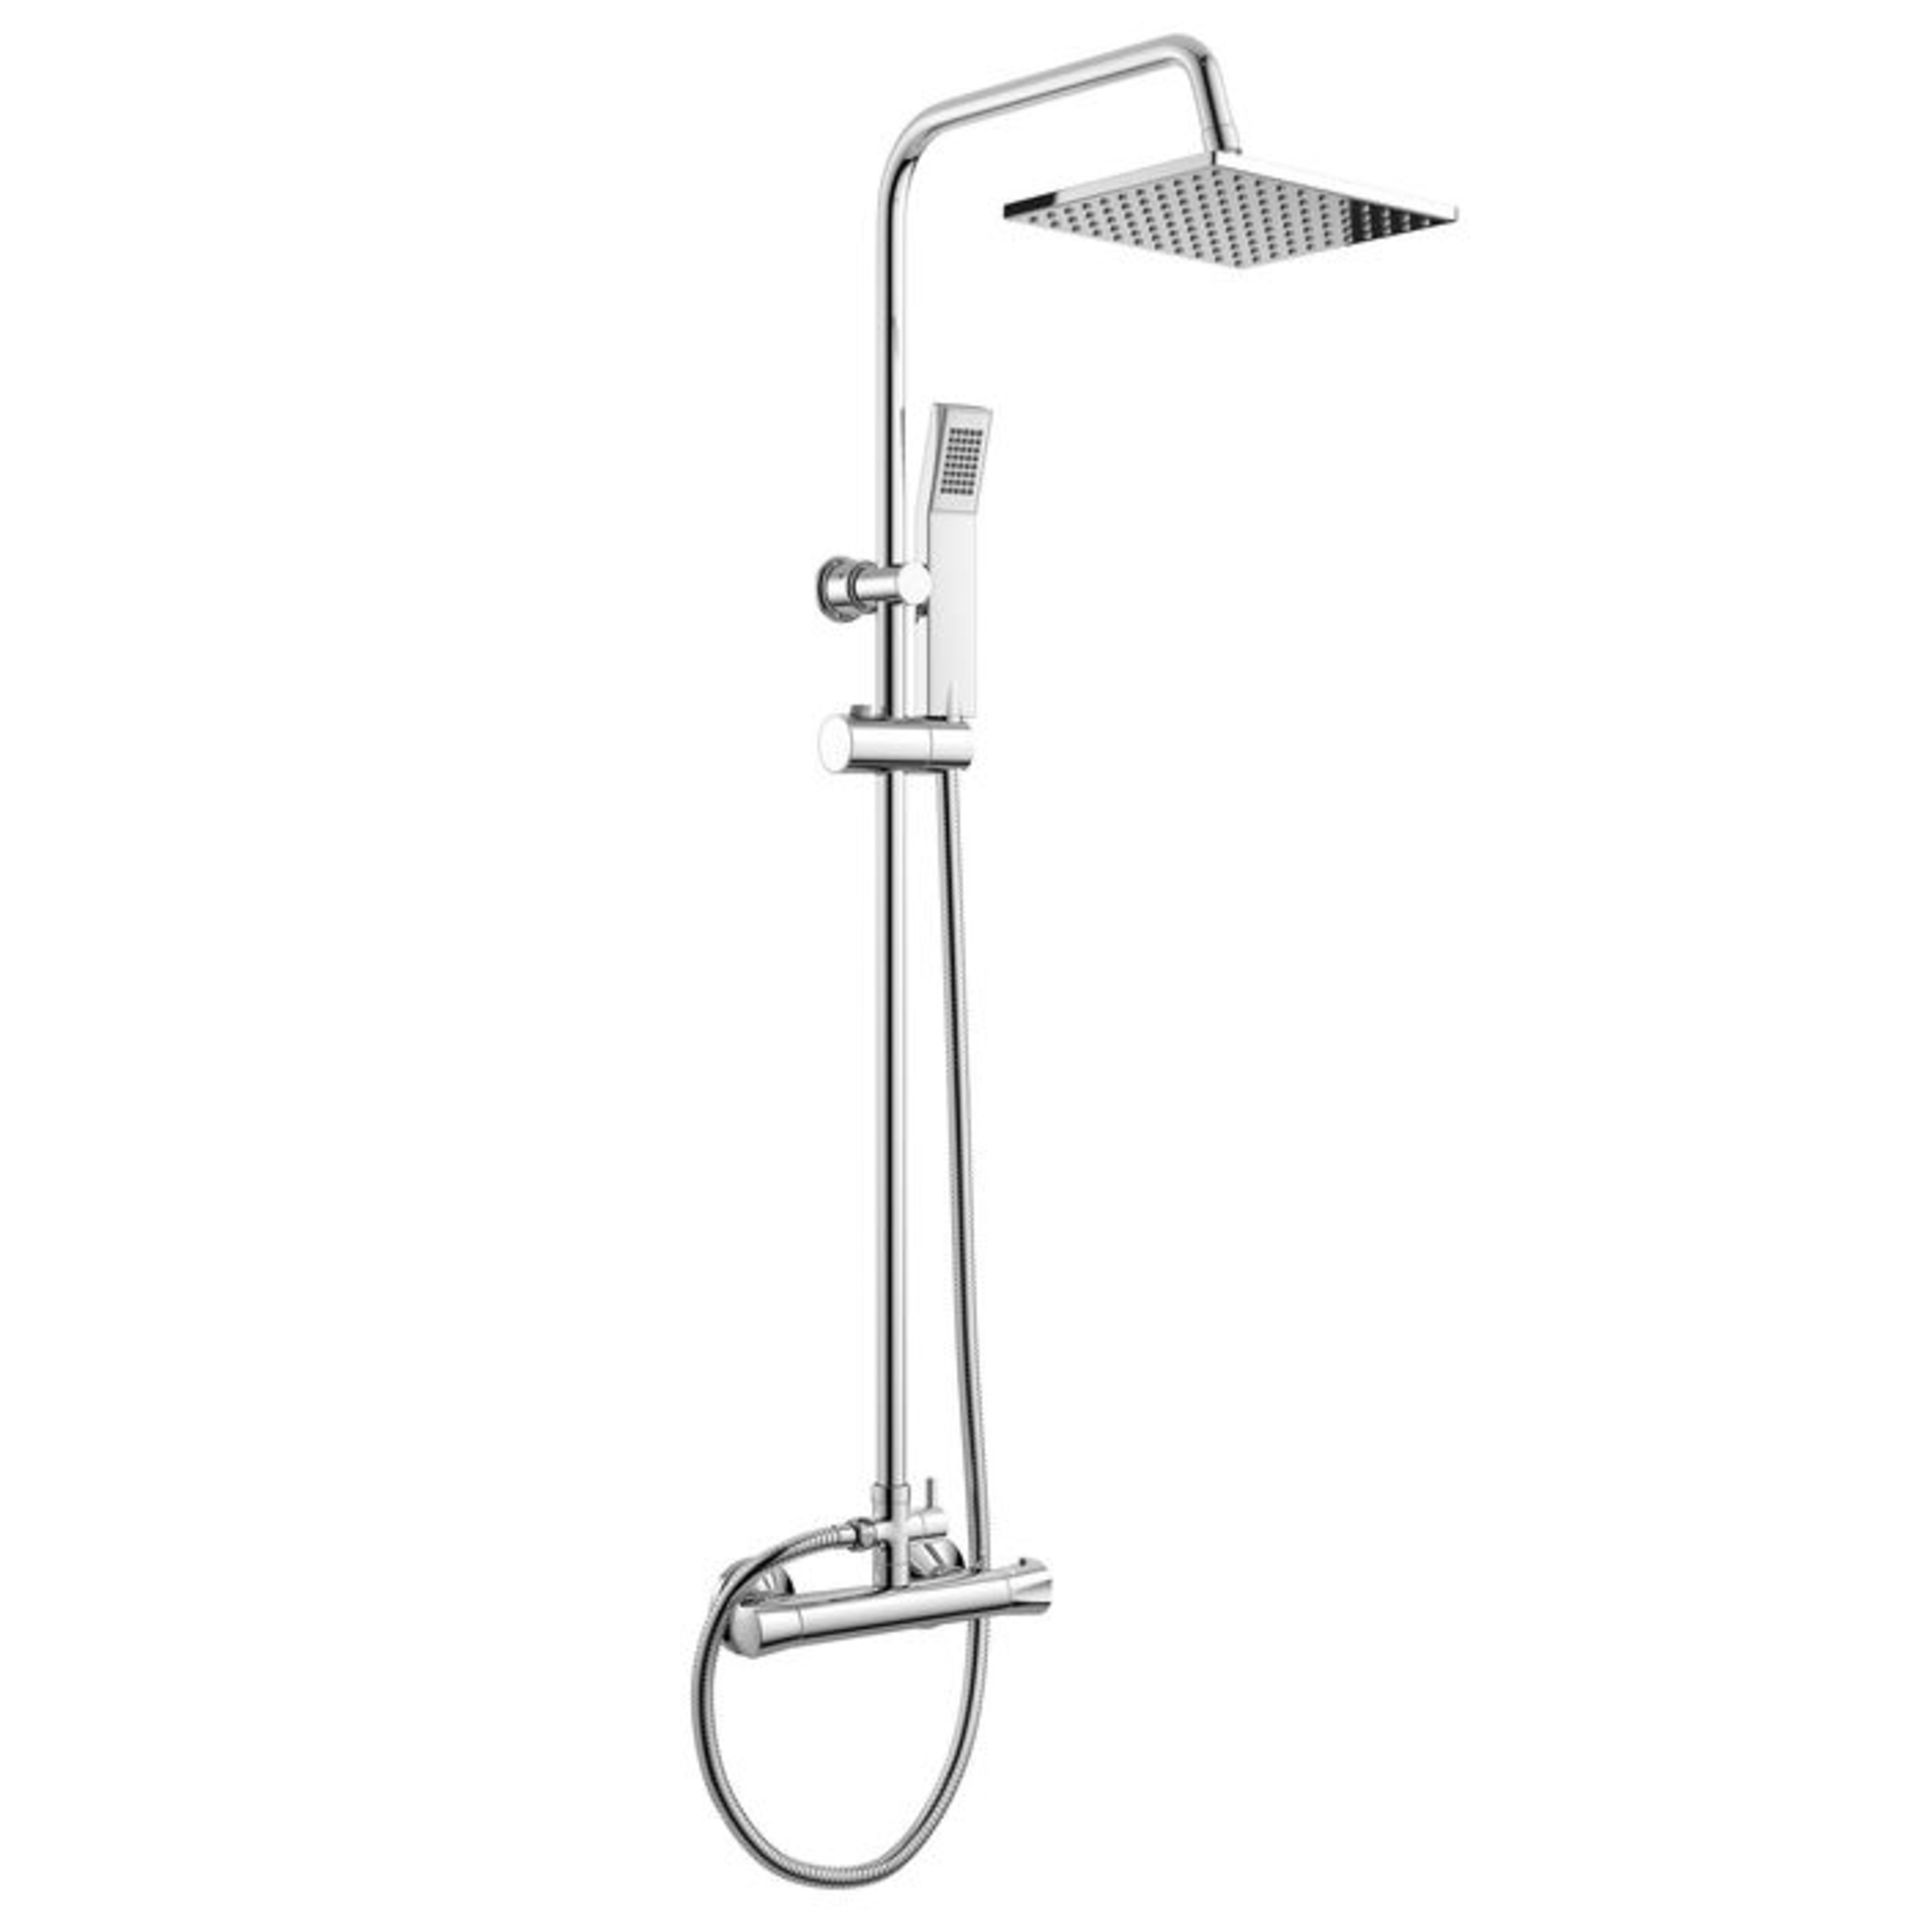 (AA145) Square Exposed Thermostatic Shower Kit & Head. Curved features and contemporary rounded...